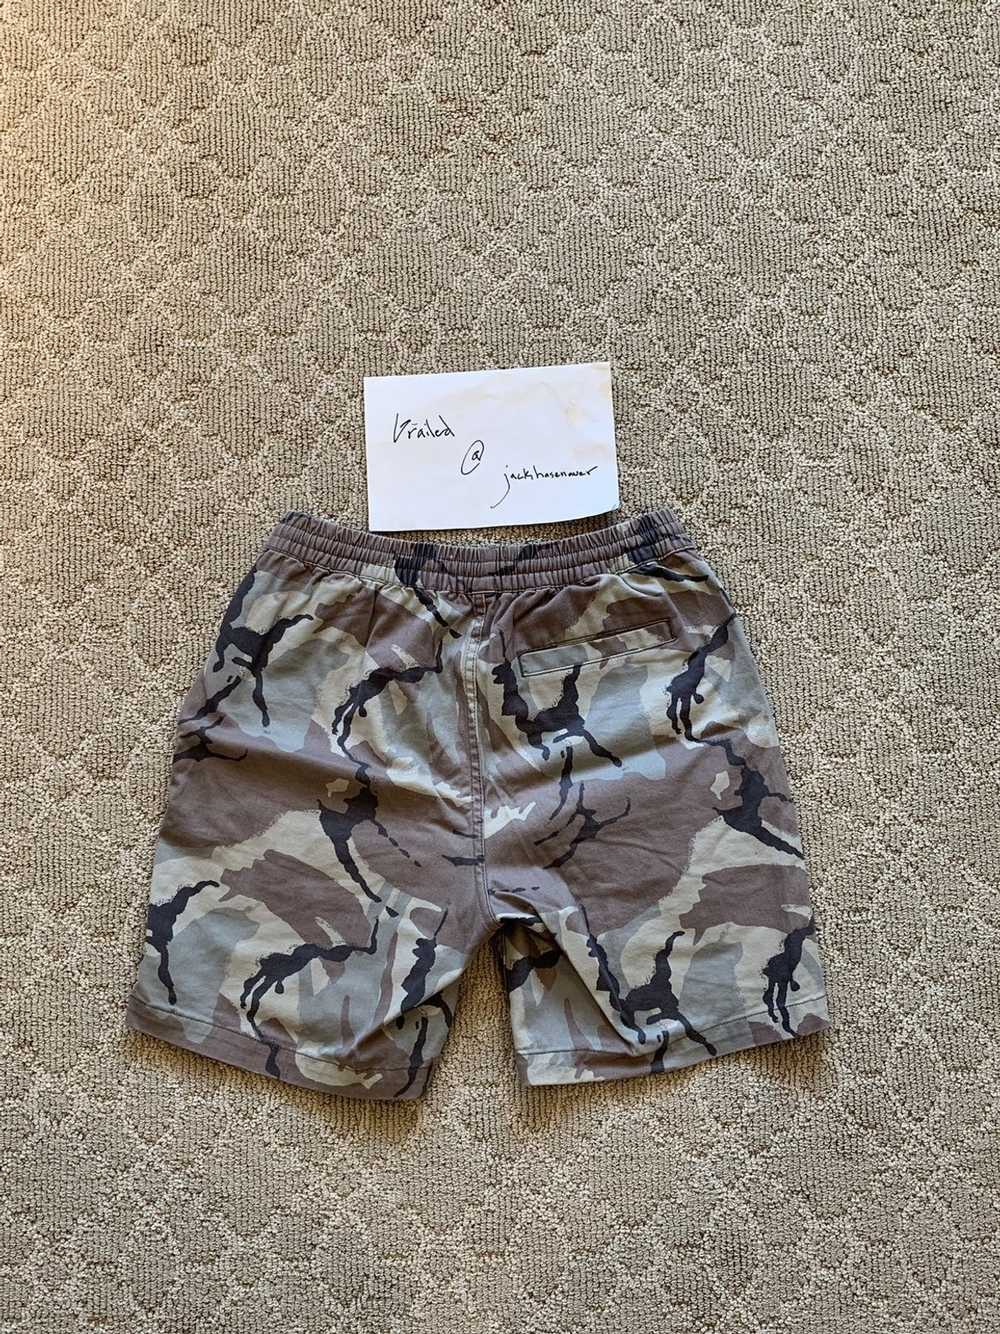 Urban Outfitters Urban Outfitters Camo Shorts - image 3